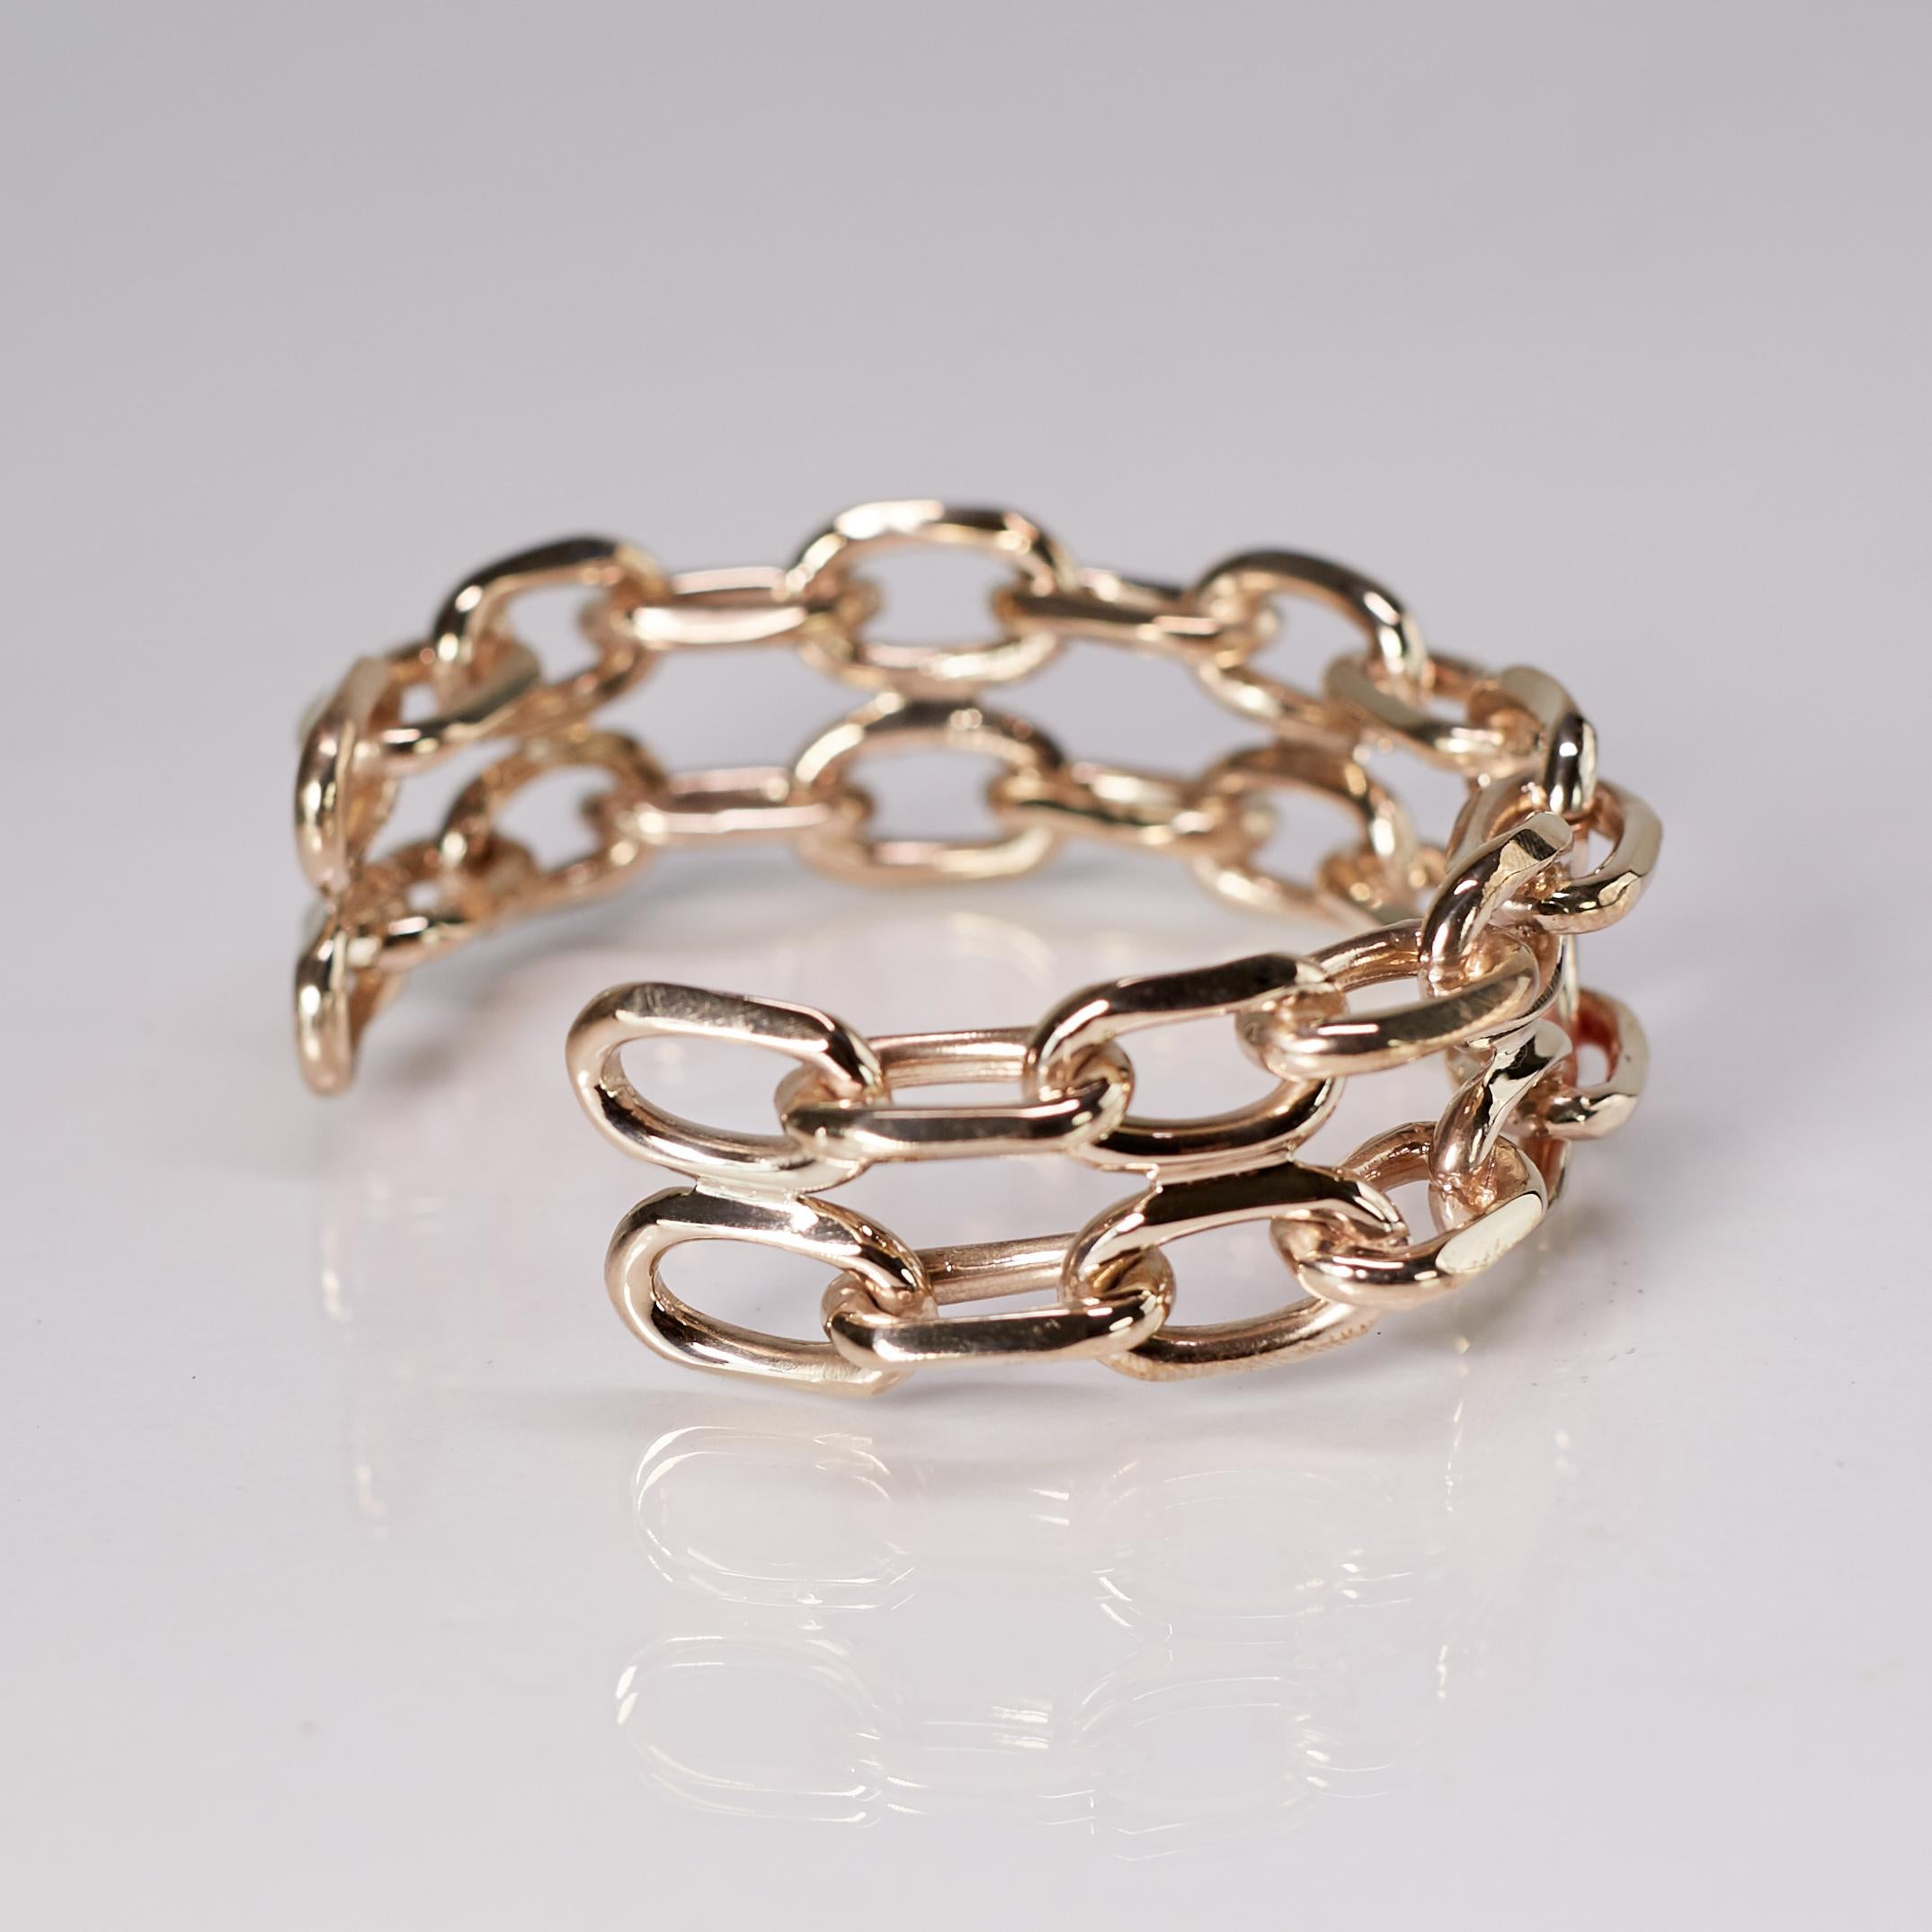 Contemporary Chunky Chain Cuff Bangle Bracelet Bronze J Dauphin For Sale